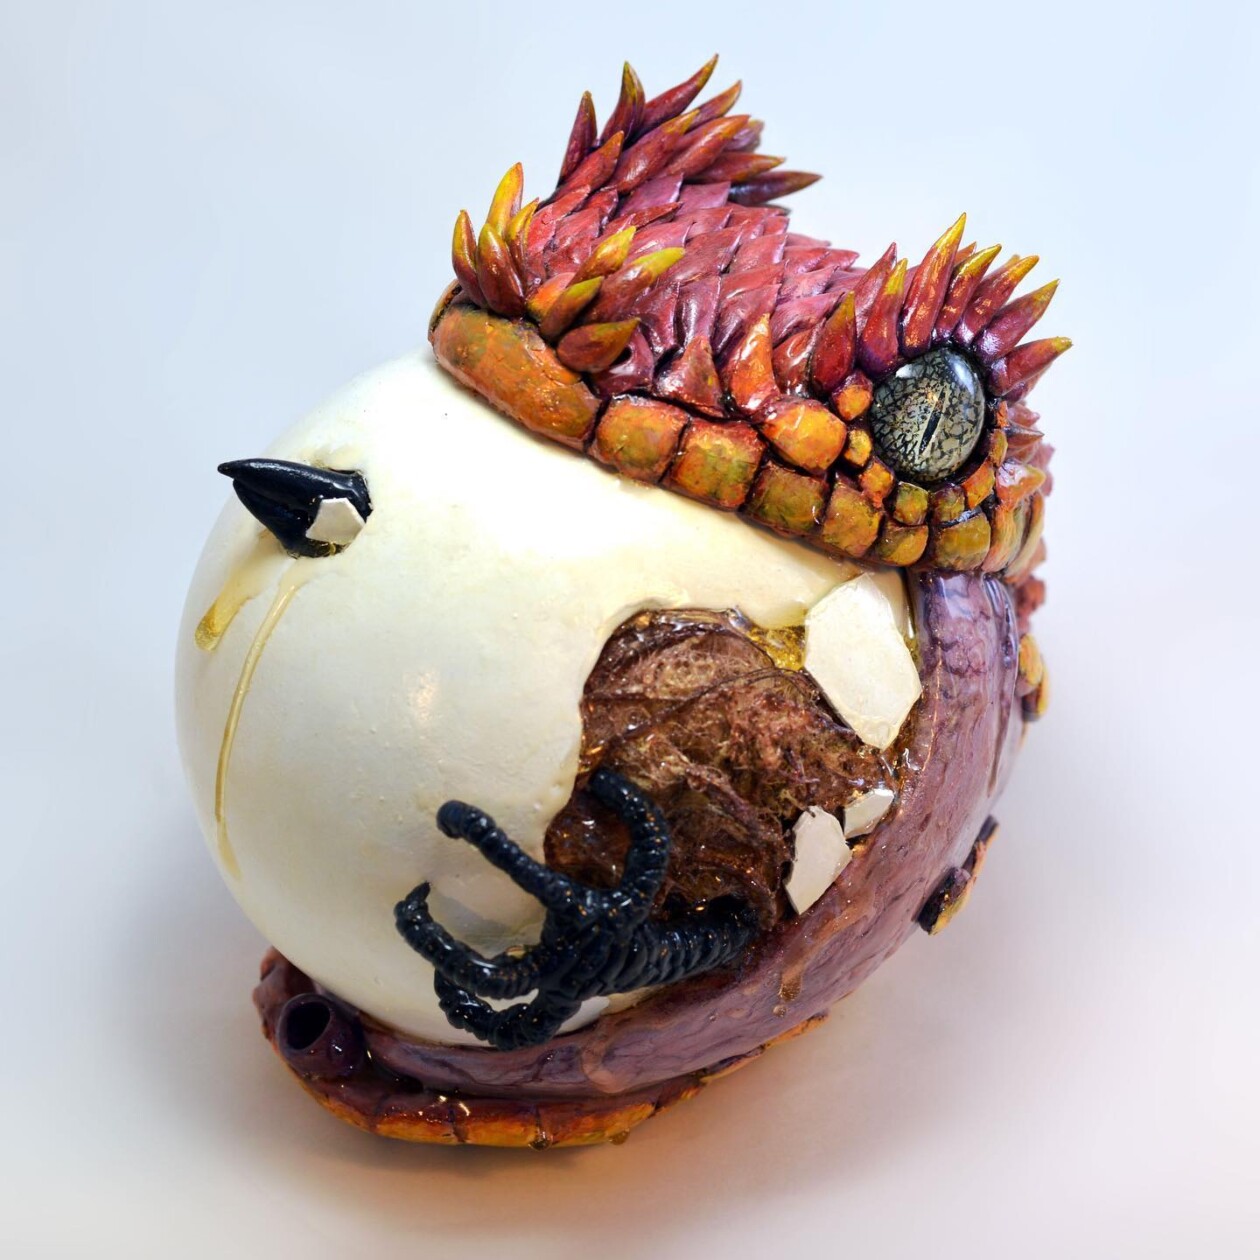 Fantastic Eggshell Sculptures Of Earth's Most Ancient Denizens By Sarah Lee (14)